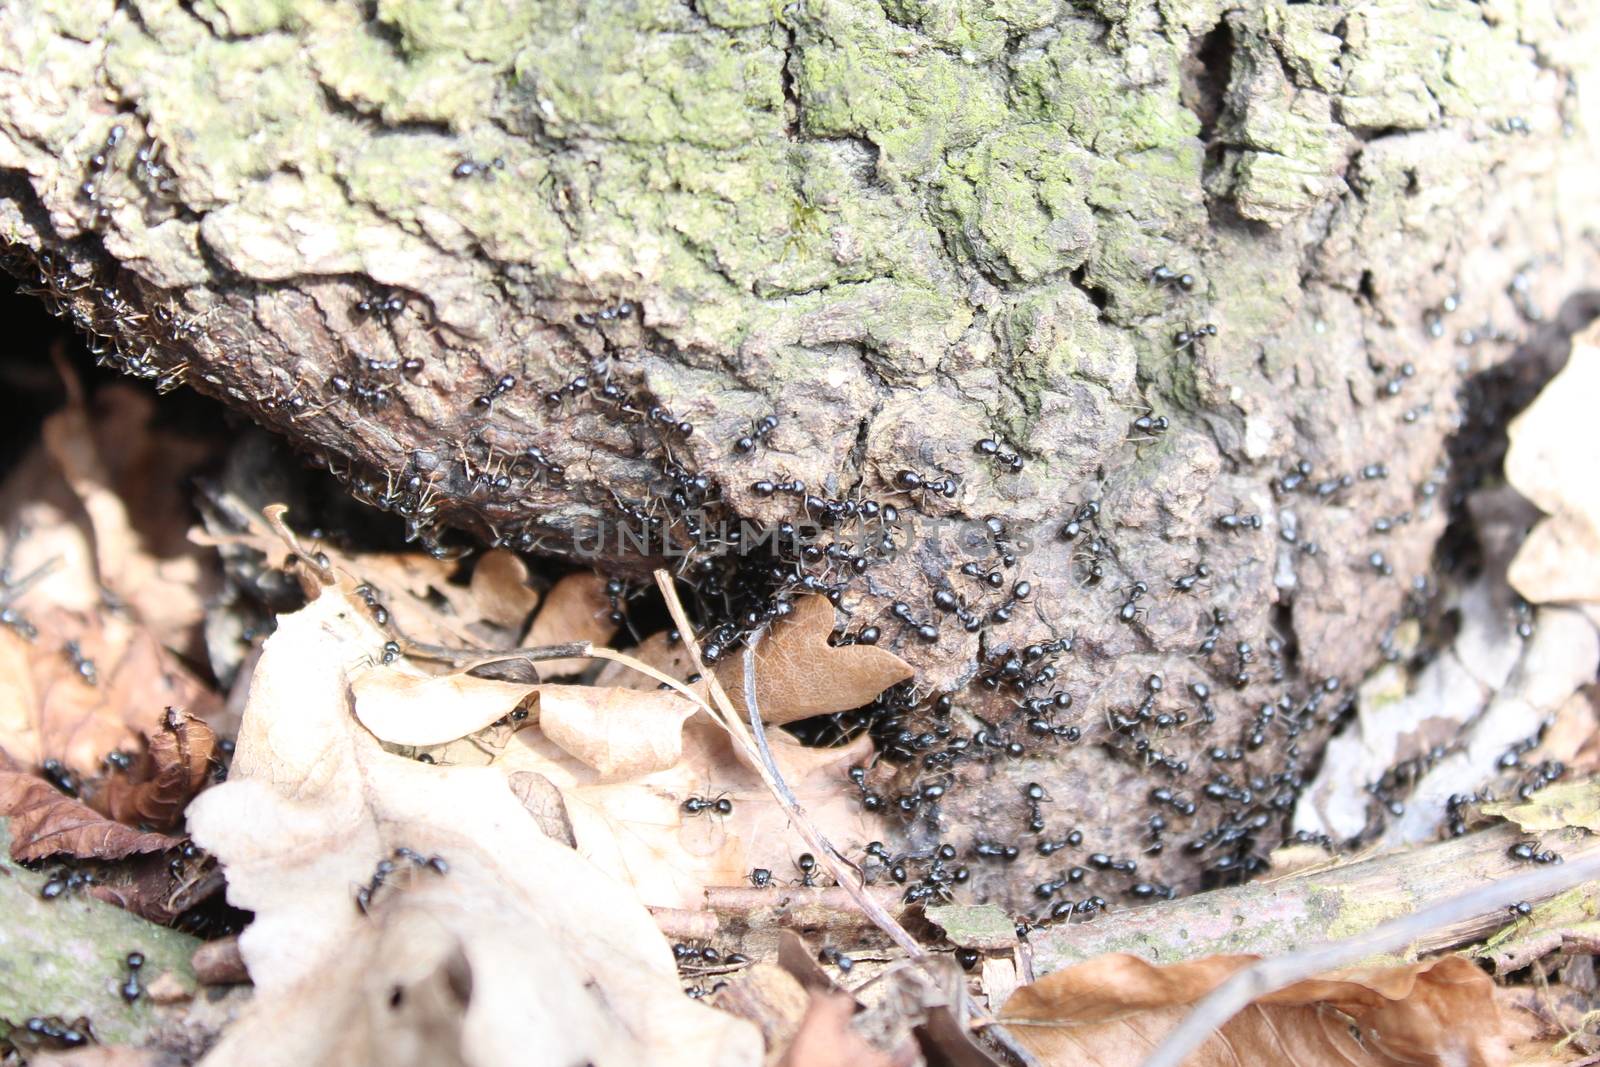 The picture shows red ants in the forest.